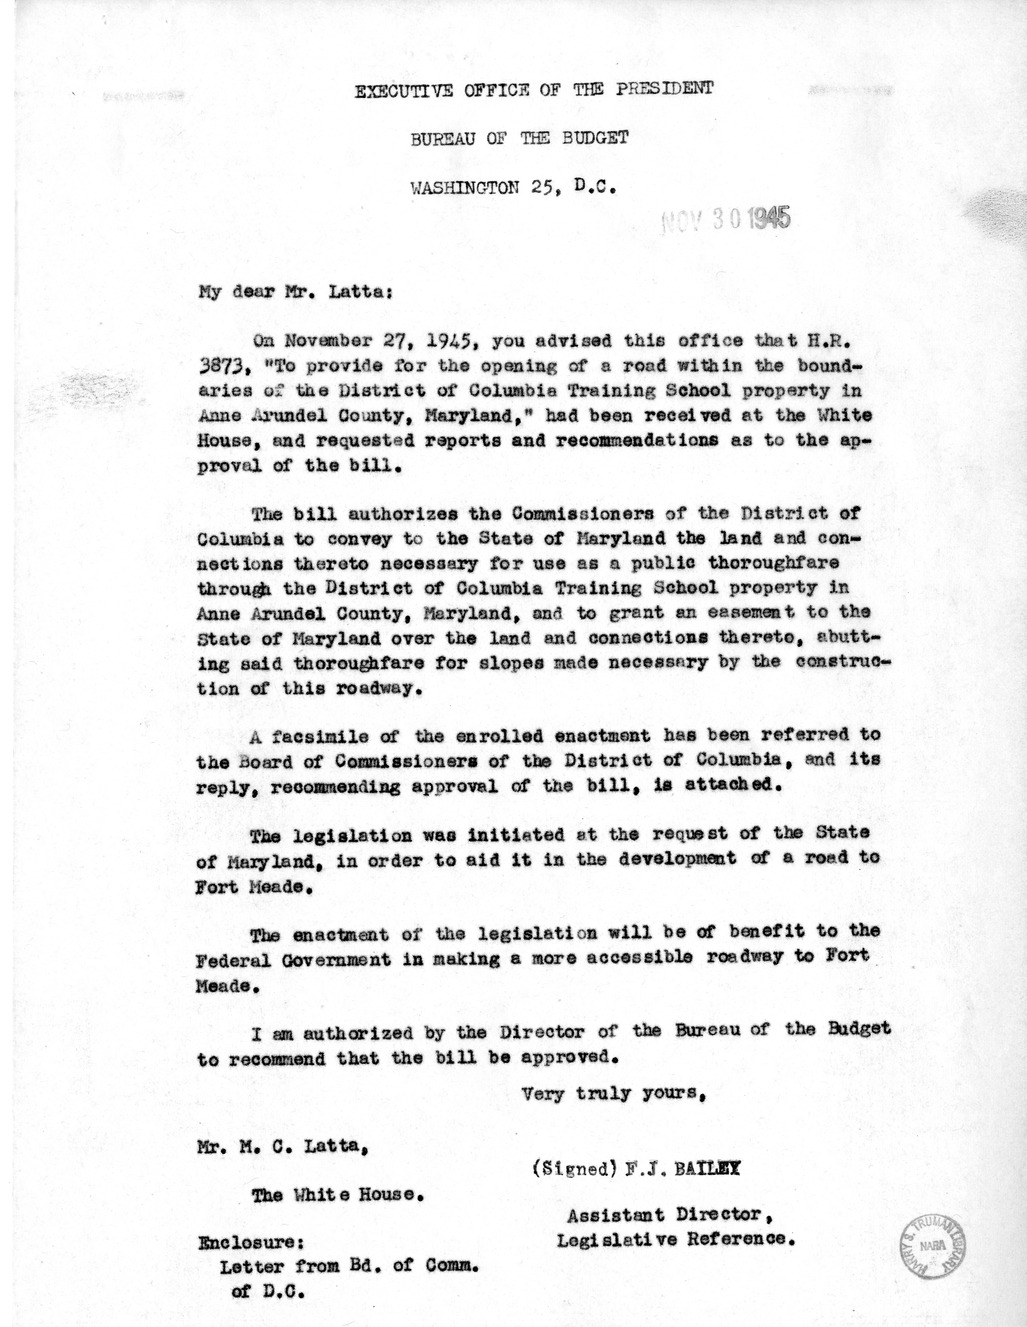 Memorandum from Frederick J. Bailey to M. C. Latta, H.R. 3873, To Provide for the Opening of a Road Within The Boundaries of the District of Columbia Training School Property in Anne Arundel County, Maryland, with Attachments